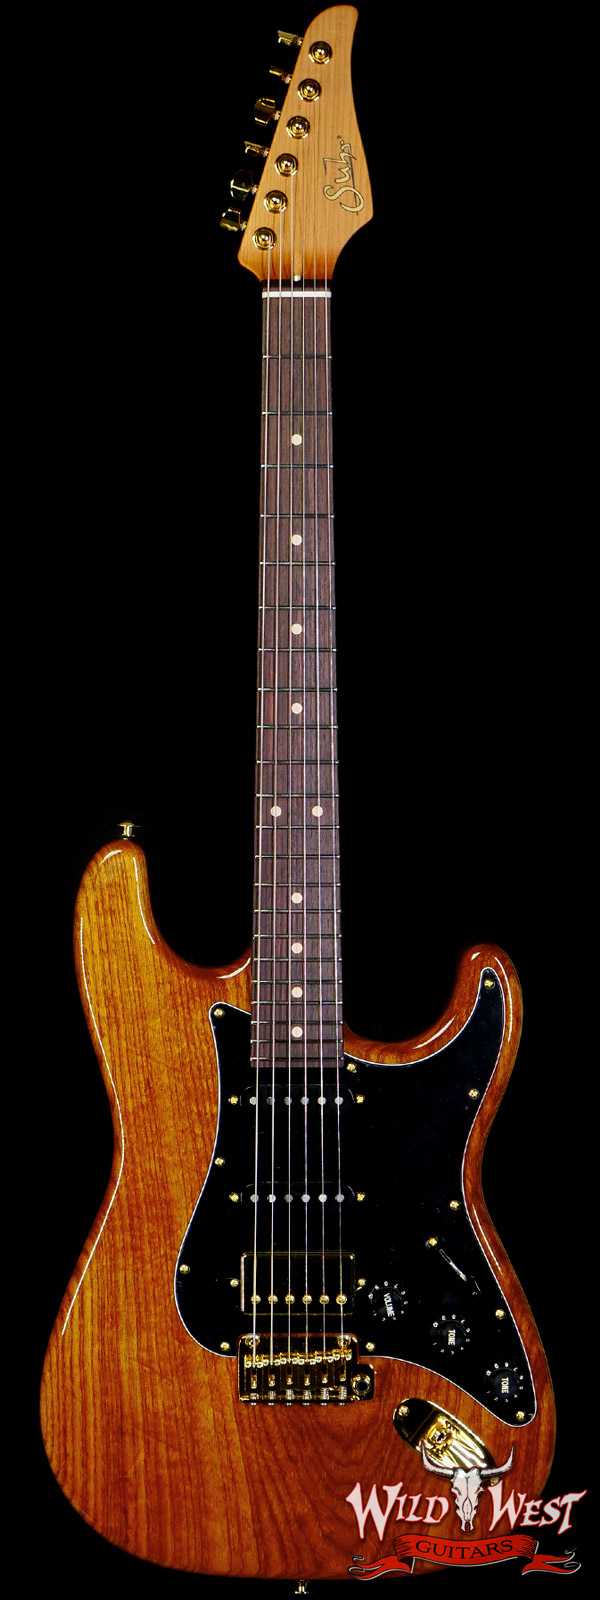 Suhr Custom Classic S HSS Roasted Swamp Ash Body Roasted Maple Neck Natural